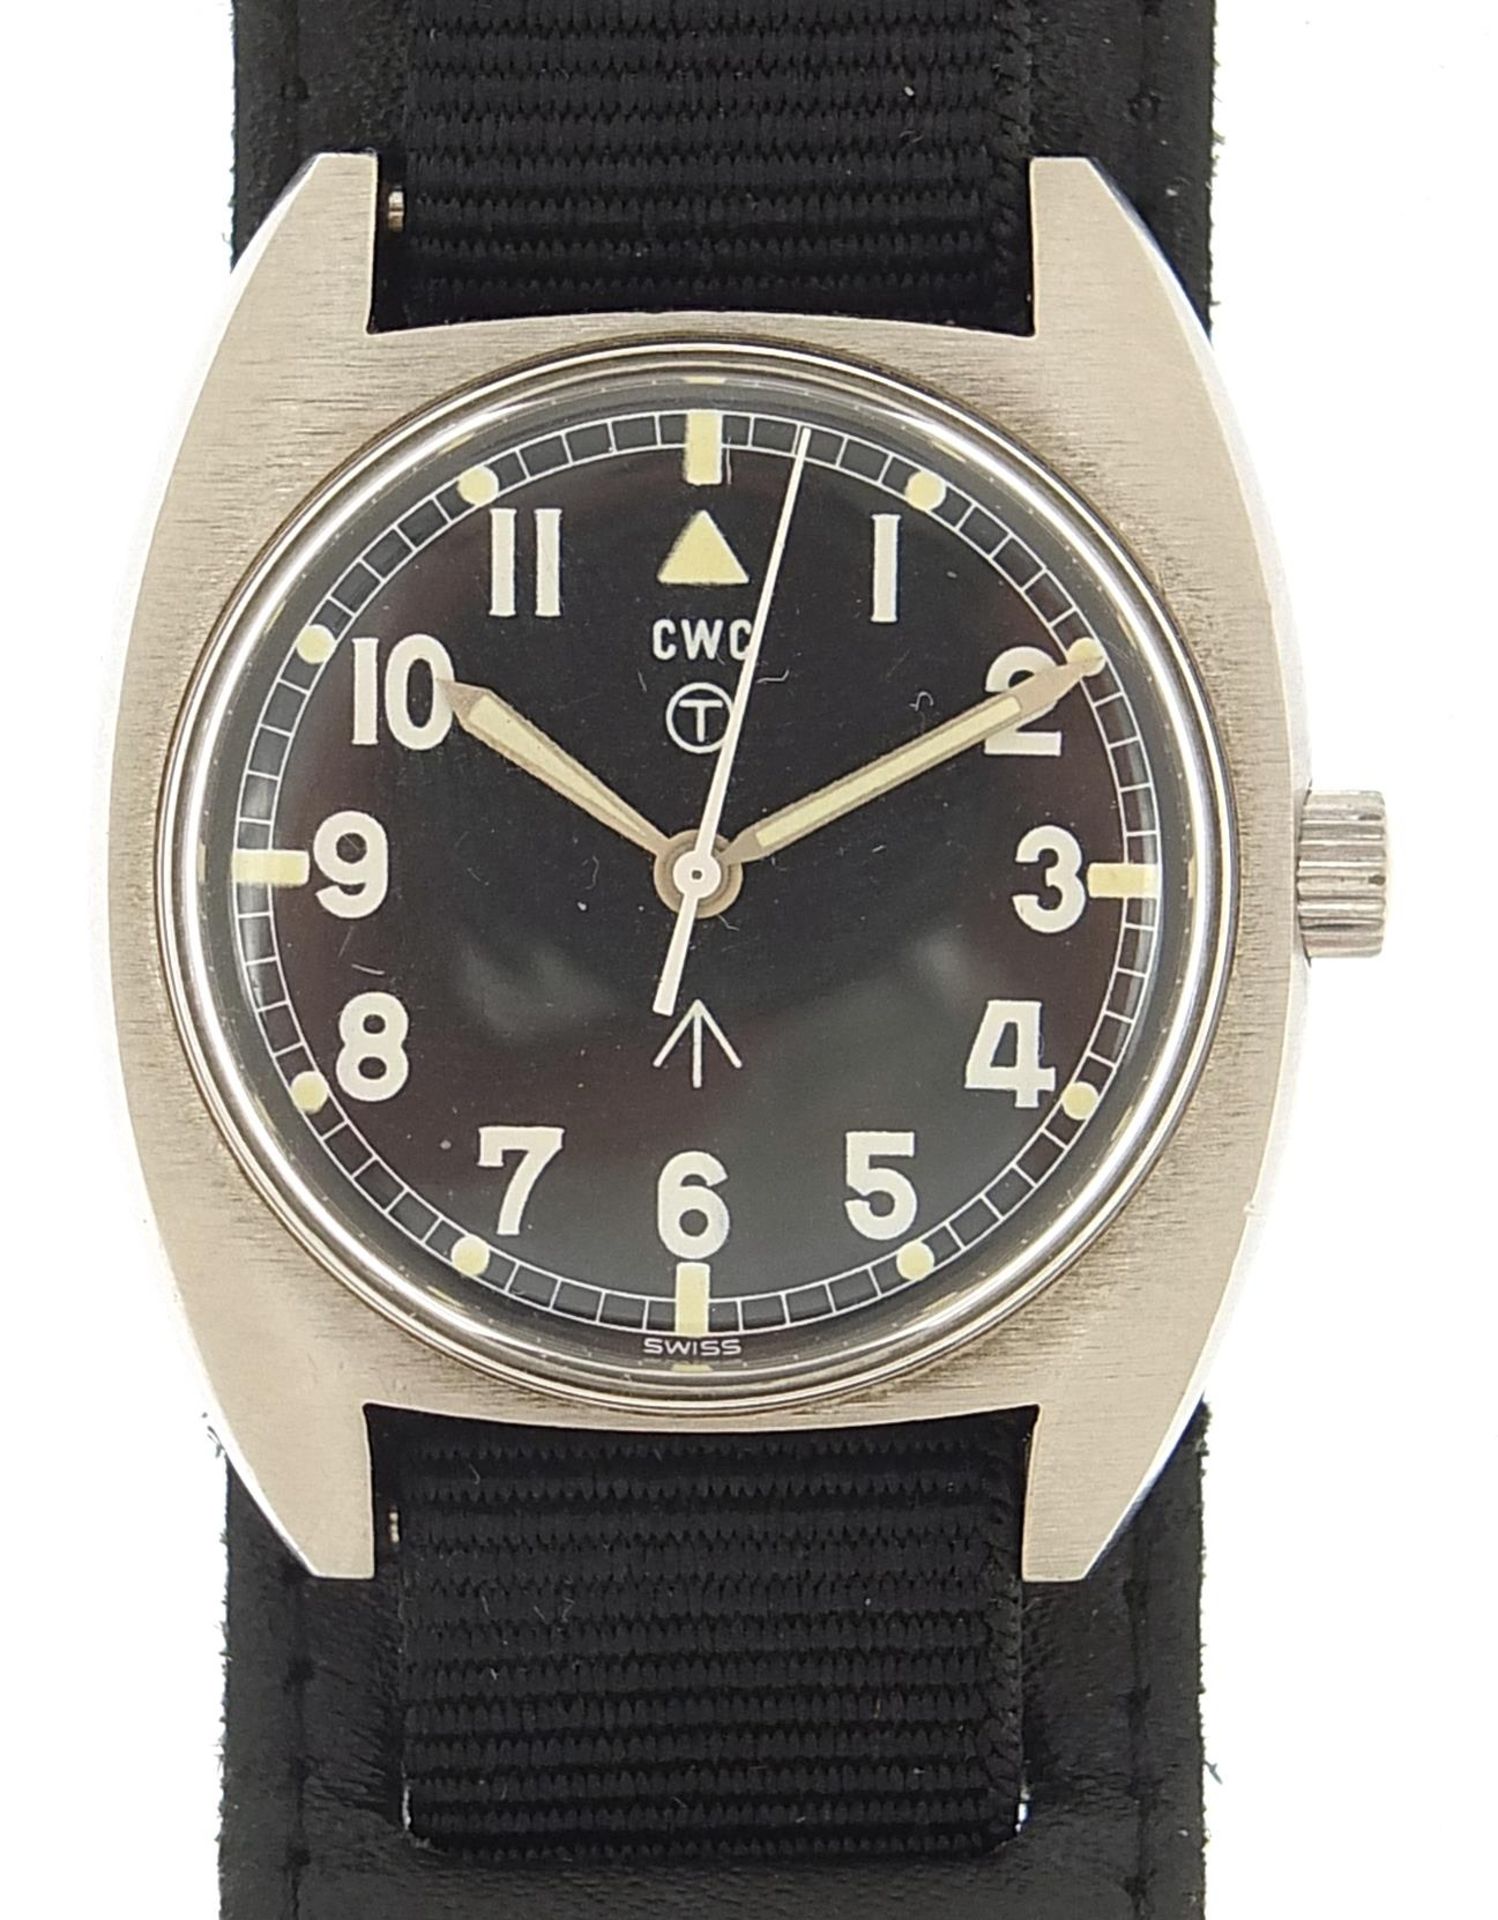 C W C, gentlemen's military issue wristwatch the case engraved 6BB-6645-99 523-6290 1677/79, the